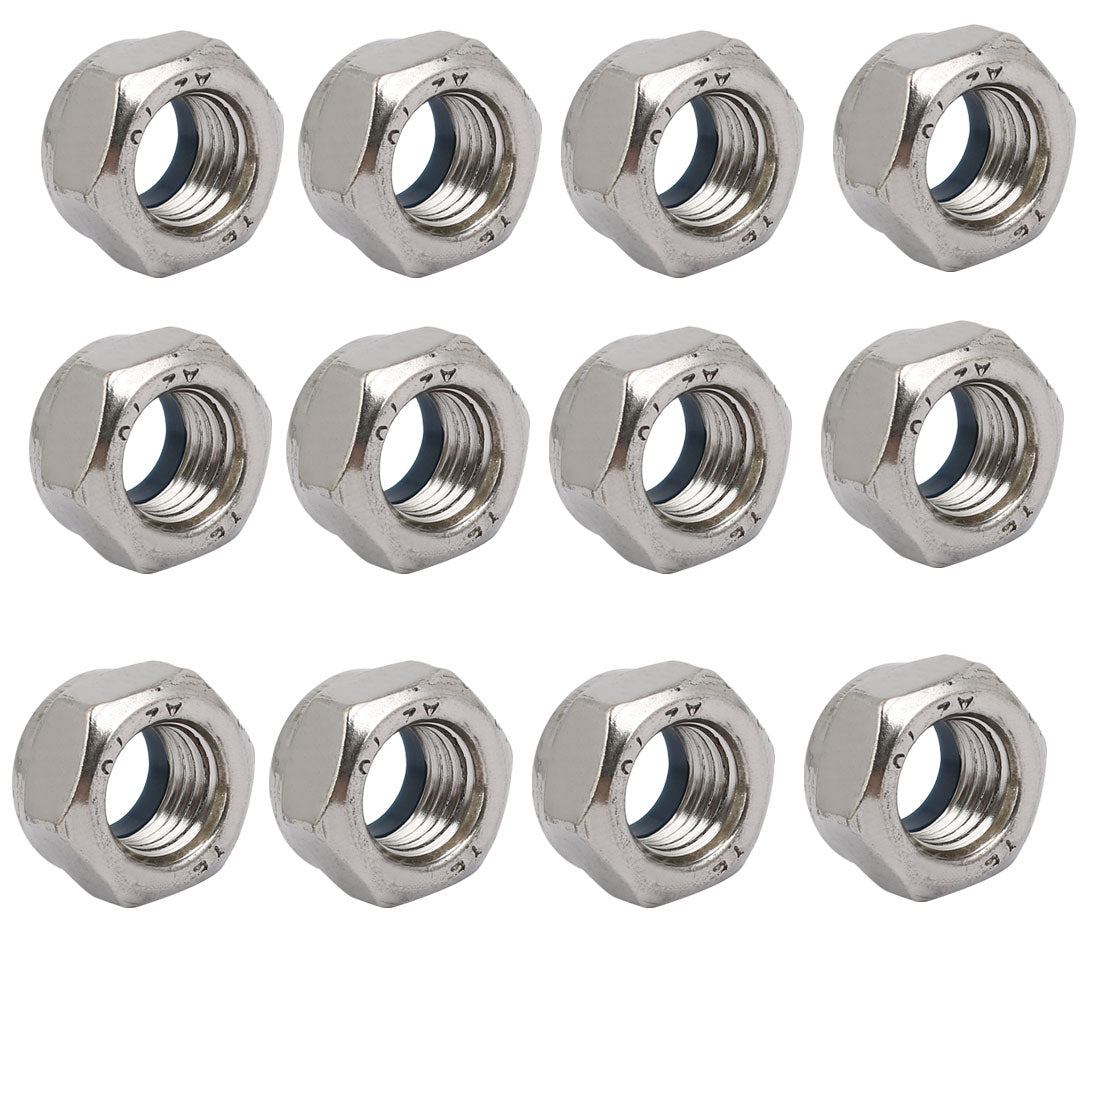 uxcell Uxcell 12pcs M12 x 1.5mm Pitch Metric Fine Thread 304 Stainless Steel Hex Lock Nuts